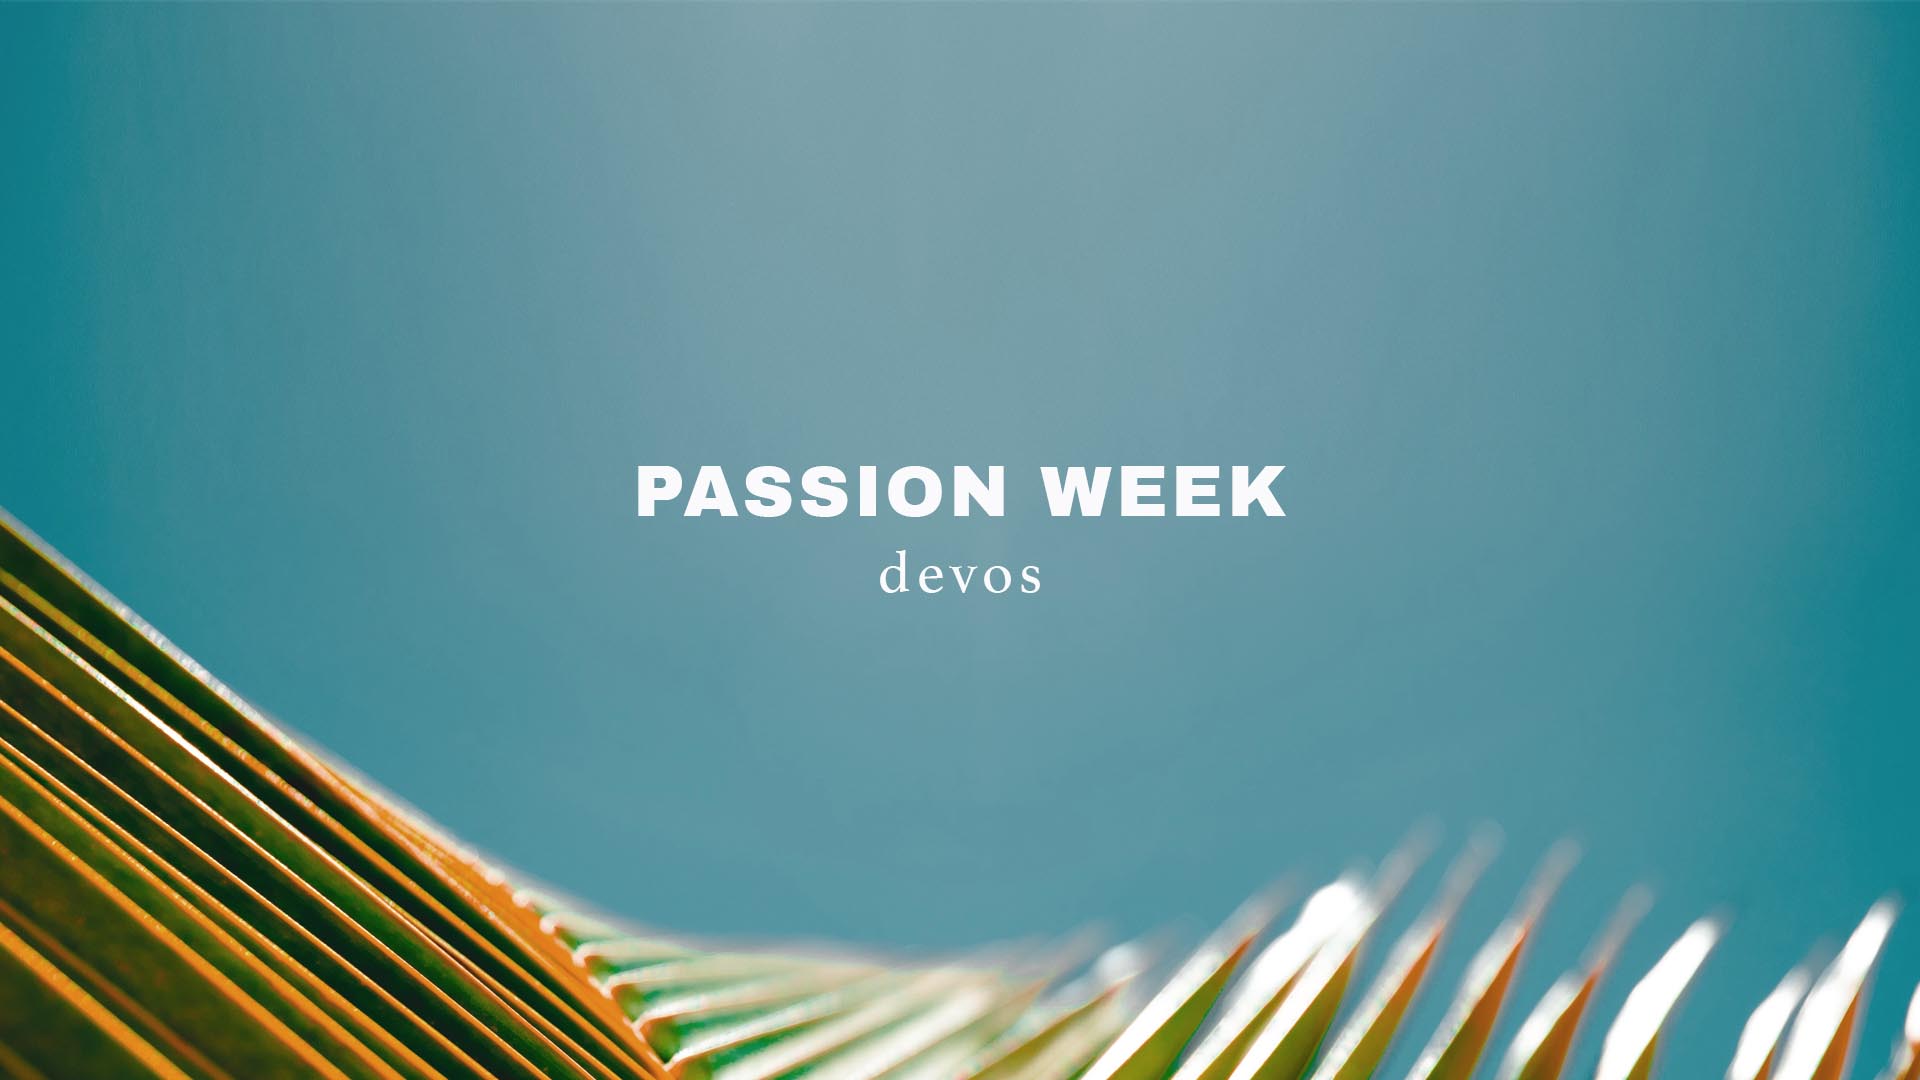 PASSION WEEK